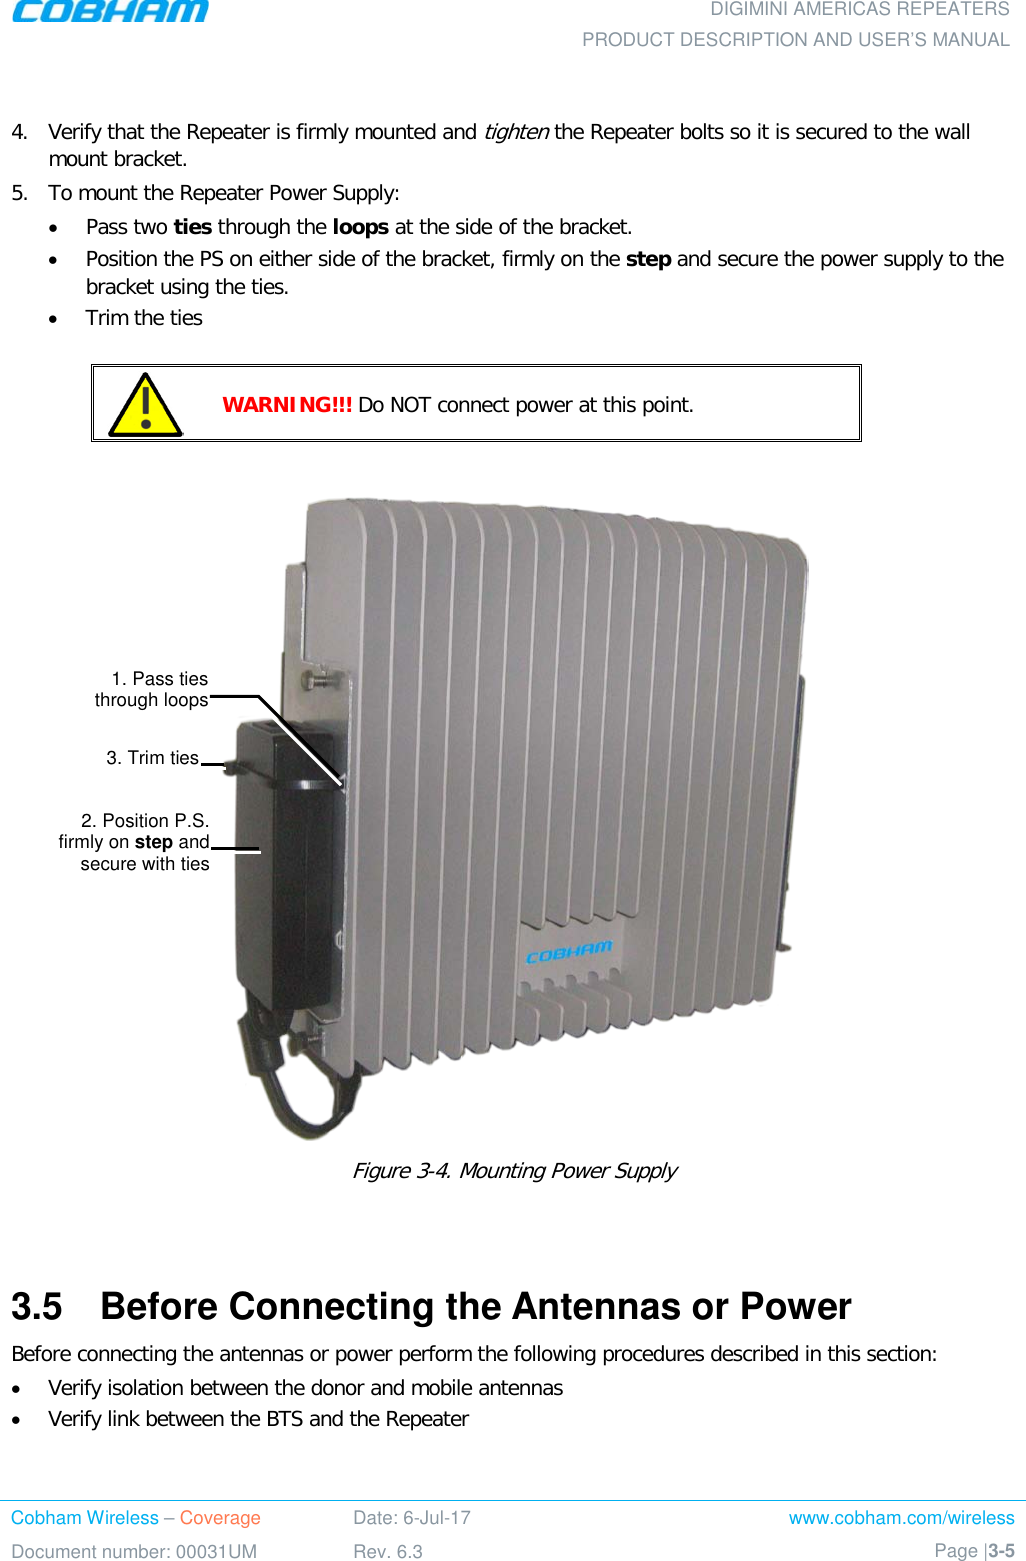  DIGIMINI AMERICAS REPEATERS PRODUCT DESCRIPTION AND USER’S MANUAL Cobham Wireless – Coverage Date: 6-Jul-17 www.cobham.com/wireless Document number: 00031UM Rev. 6.3 Page |3-5           4.  Verify that the Repeater is firmly mounted and tighten the Repeater bolts so it is secured to the wall mount bracket. 5.  To mount the Repeater Power Supply: • Pass two ties through the loops at the side of the bracket. • Position the PS on either side of the bracket, firmly on the step and secure the power supply to the bracket using the ties. • Trim the ties   WARNING!!! Do NOT connect power at this point.   Figure  3-4. Mounting Power Supply   3.5  Before Connecting the Antennas or Power Before connecting the antennas or power perform the following procedures described in this section: • Verify isolation between the donor and mobile antennas • Verify link between the BTS and the Repeater 1. Pass ties  through loops 2. Position P.S. firmly on step and secure with ties 3. Trim ties 